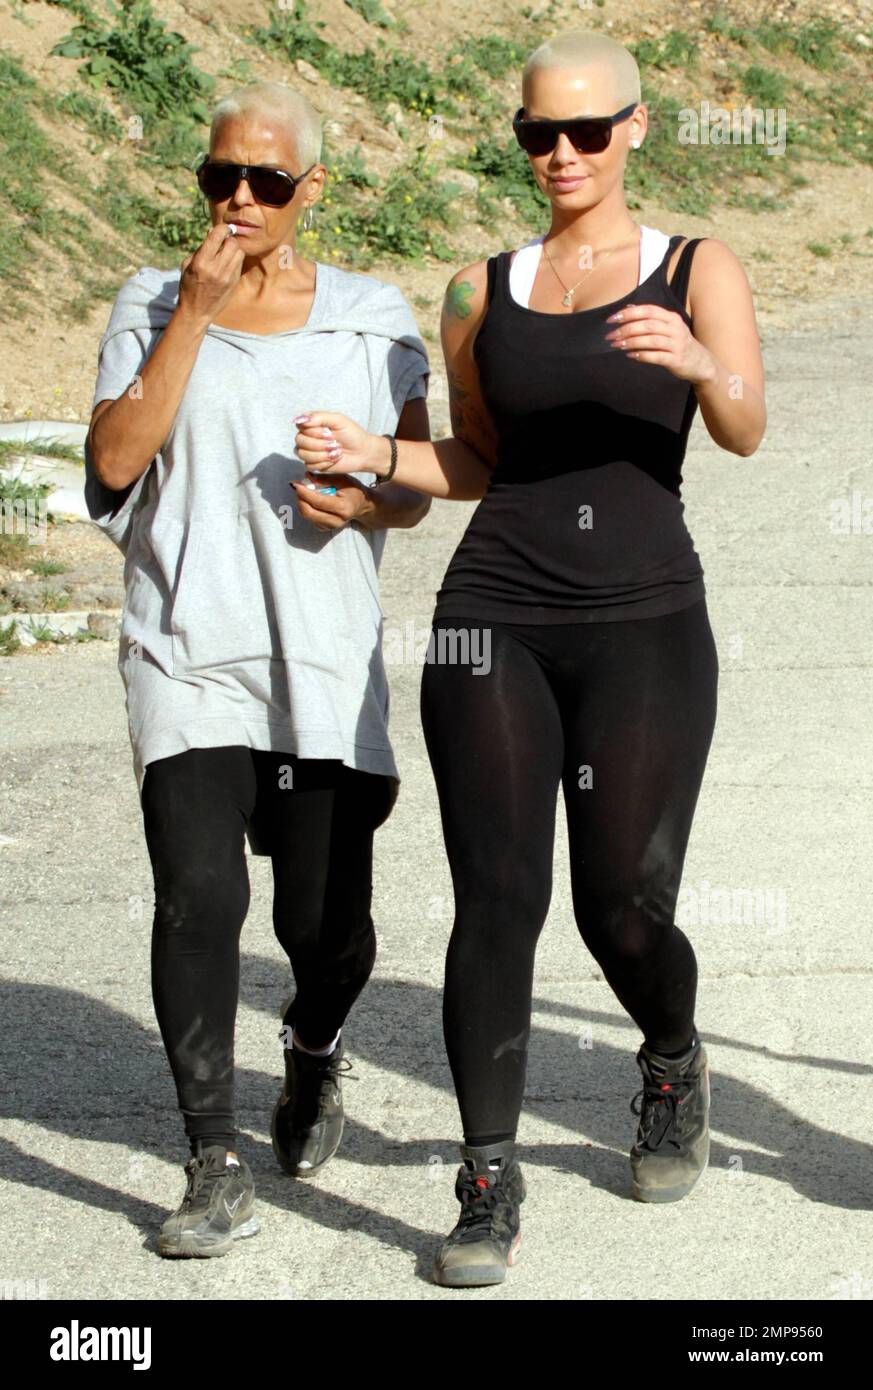 https://c8.alamy.com/comp/2MP9560/exclusive!!-amber-rose-wears-figure-hugging-leggings-that-showed-off-her-curvaceous-figure-as-she-worked-on-her-fitness-with-a-couple-of-friends-by-taking-a-hike-on-a-canyon-in-la-its-been-reported-that-the-29-year-old-american-model-who-is-most-famously-known-for-her-high-profile-relationship-with-kanye-west-recently-called-kim-kardashian-a-home-wrecker-and-blamed-kim-for-her-break-up-with-kanye-rose-who-had-remained-silent-since-the-break-up-with-the-rapper-back-in-2010-is-now-opening-up-kim-is-one-of-the-main-reasons-why-me-and-kanye-are-not-together-amber-stated-shes-a-home-w-2MP9560.jpg